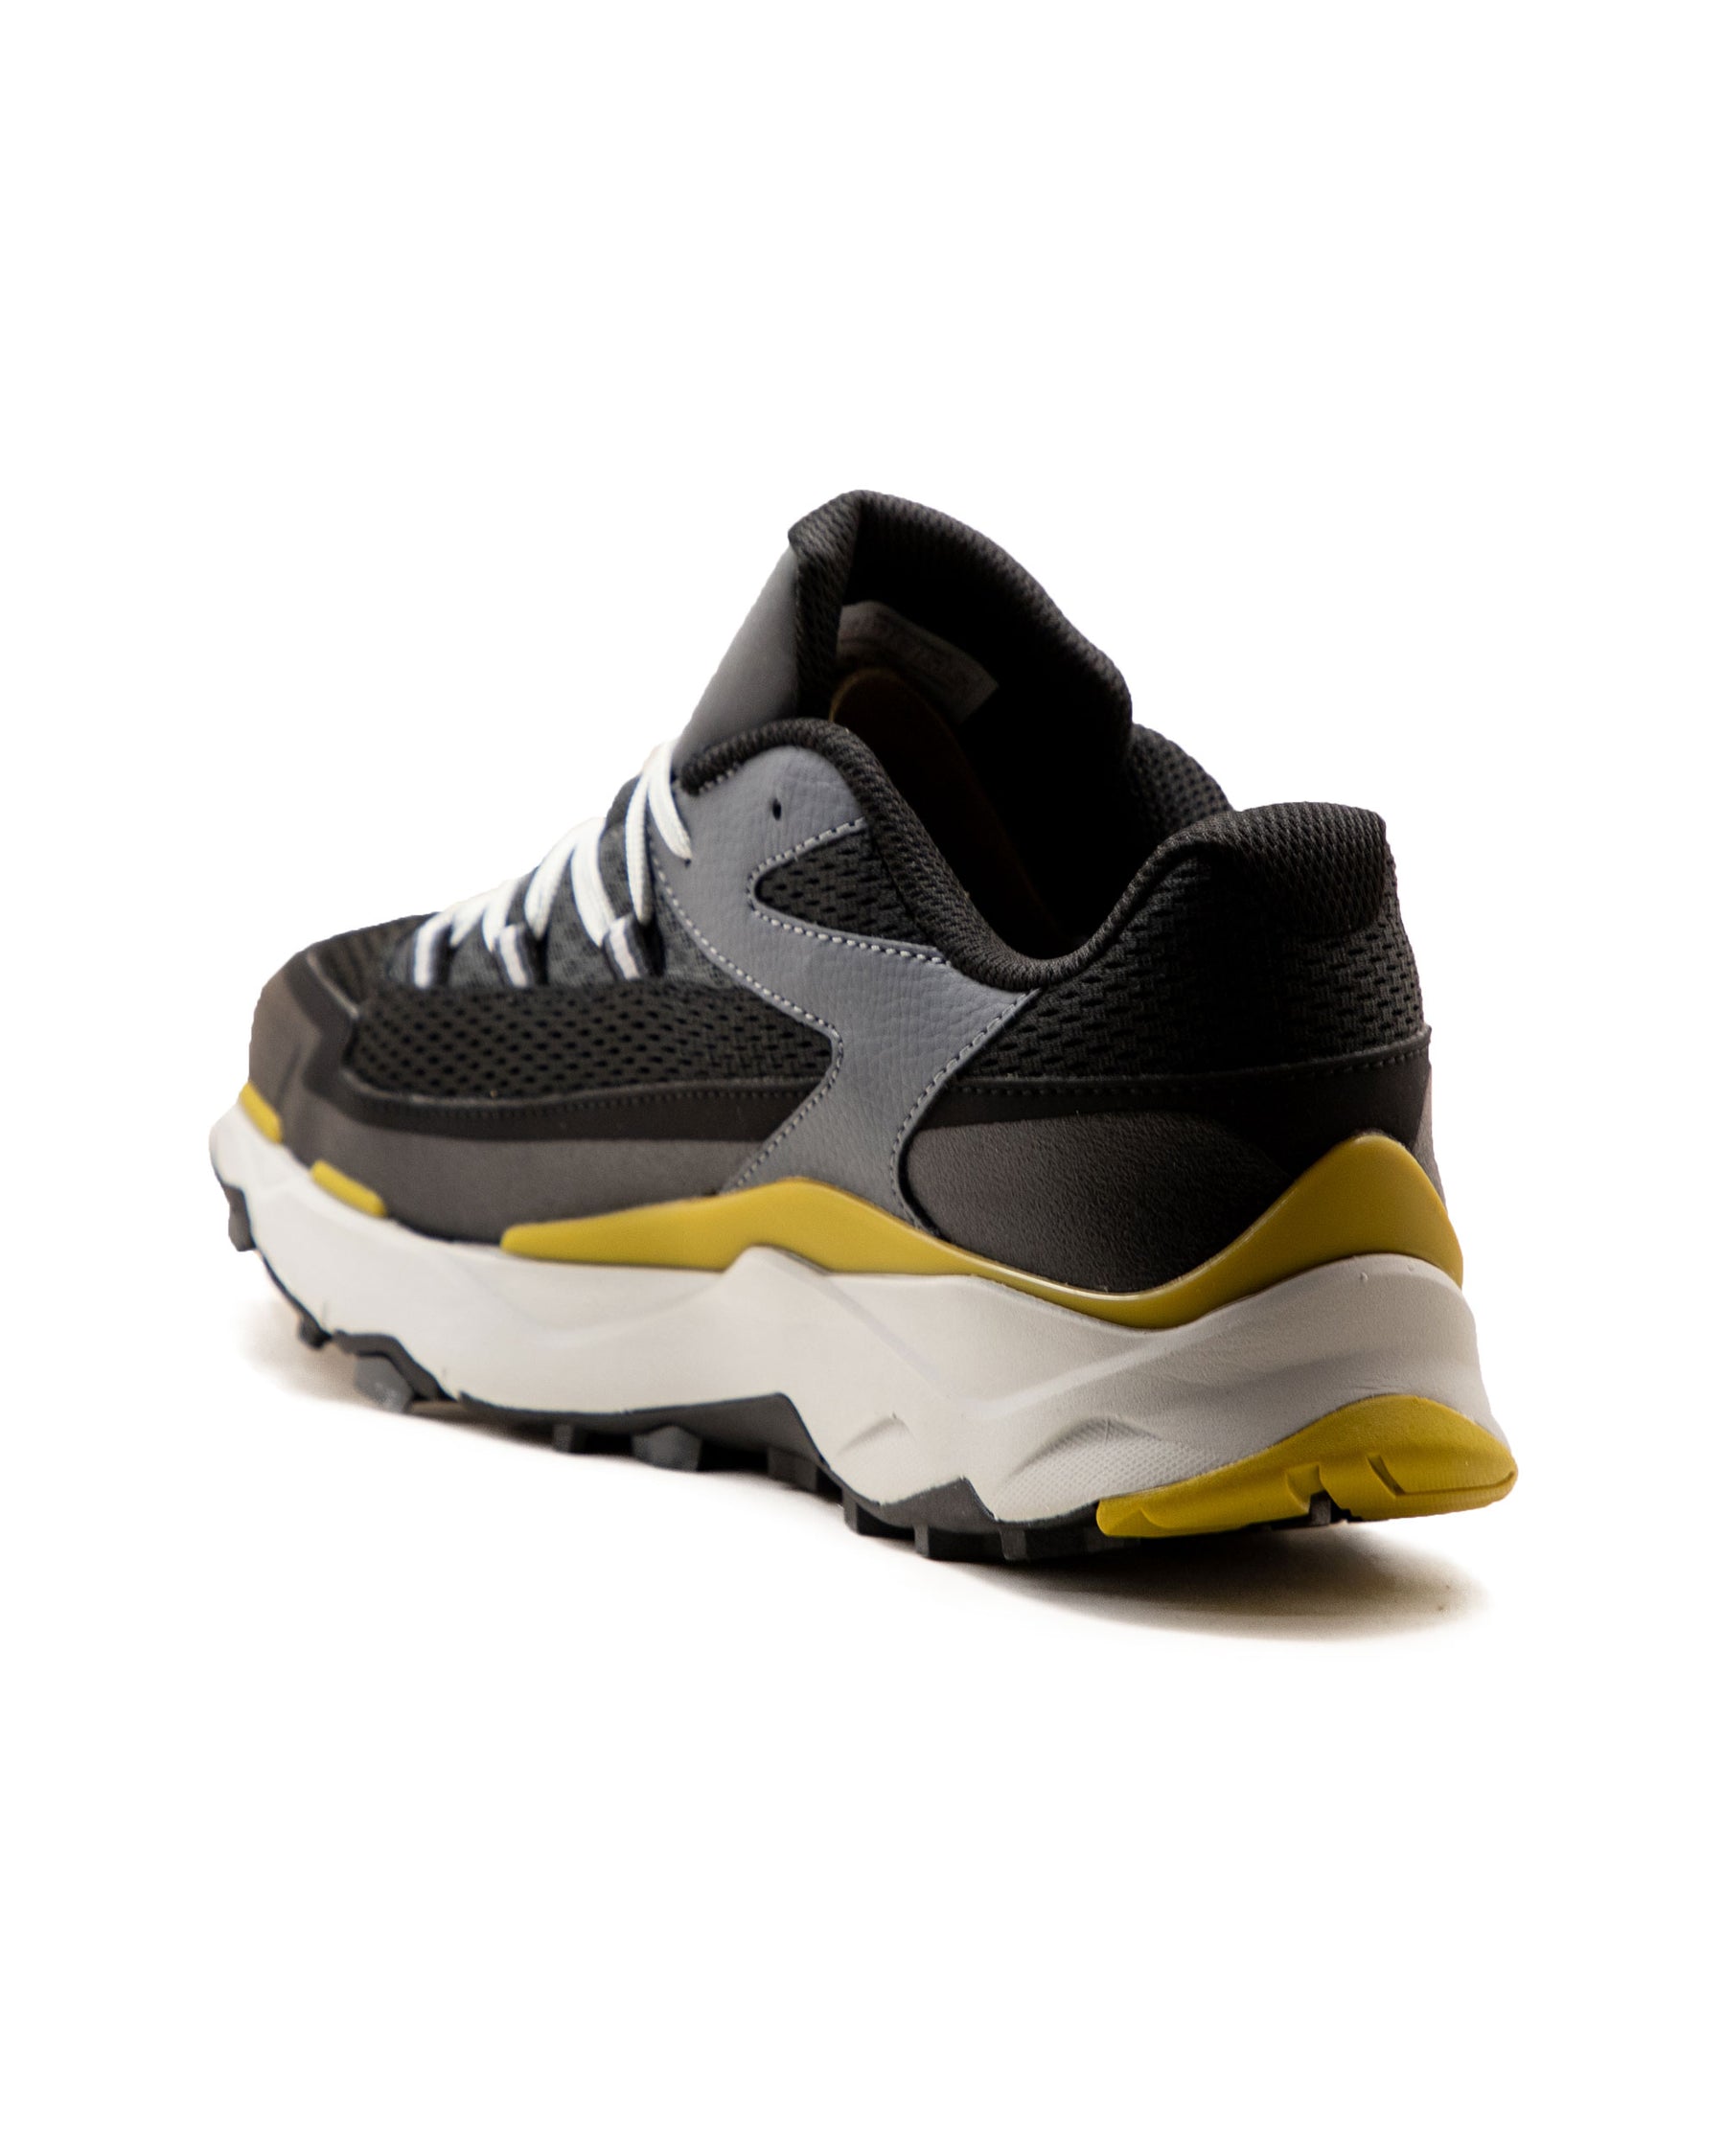 Sneakers The North Face Vectiv Tavaral Black